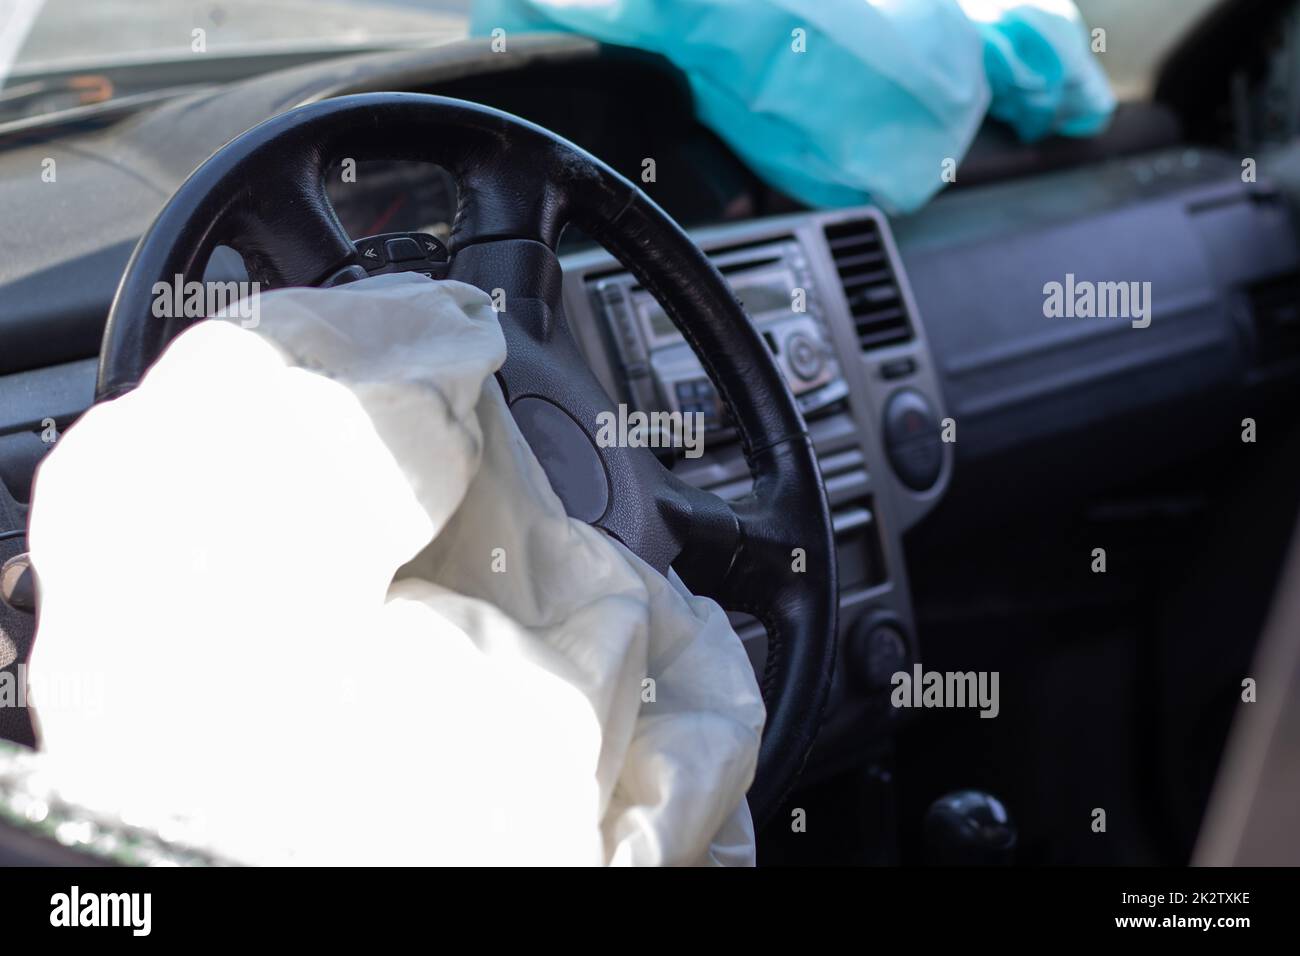 The driver's airbag deployed on the steering wheel of the car after the collision. Deflated airbags after flared deployment. The airbag deployed. Car after an accident. Safety device in the car. Stock Photo